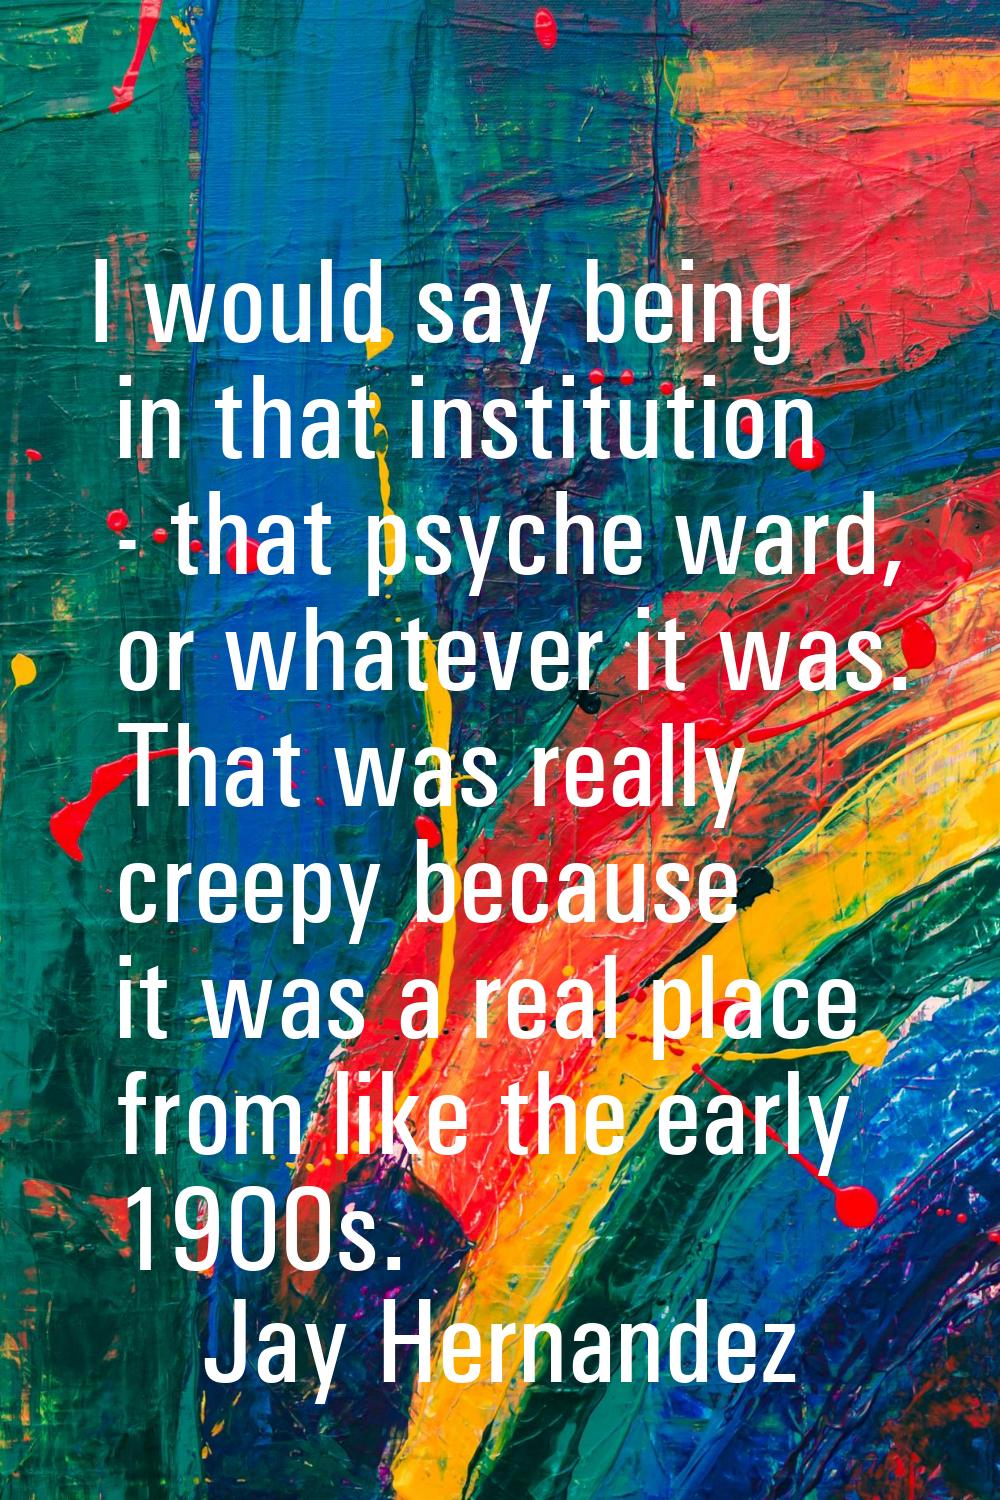 I would say being in that institution - that psyche ward, or whatever it was. That was really creep